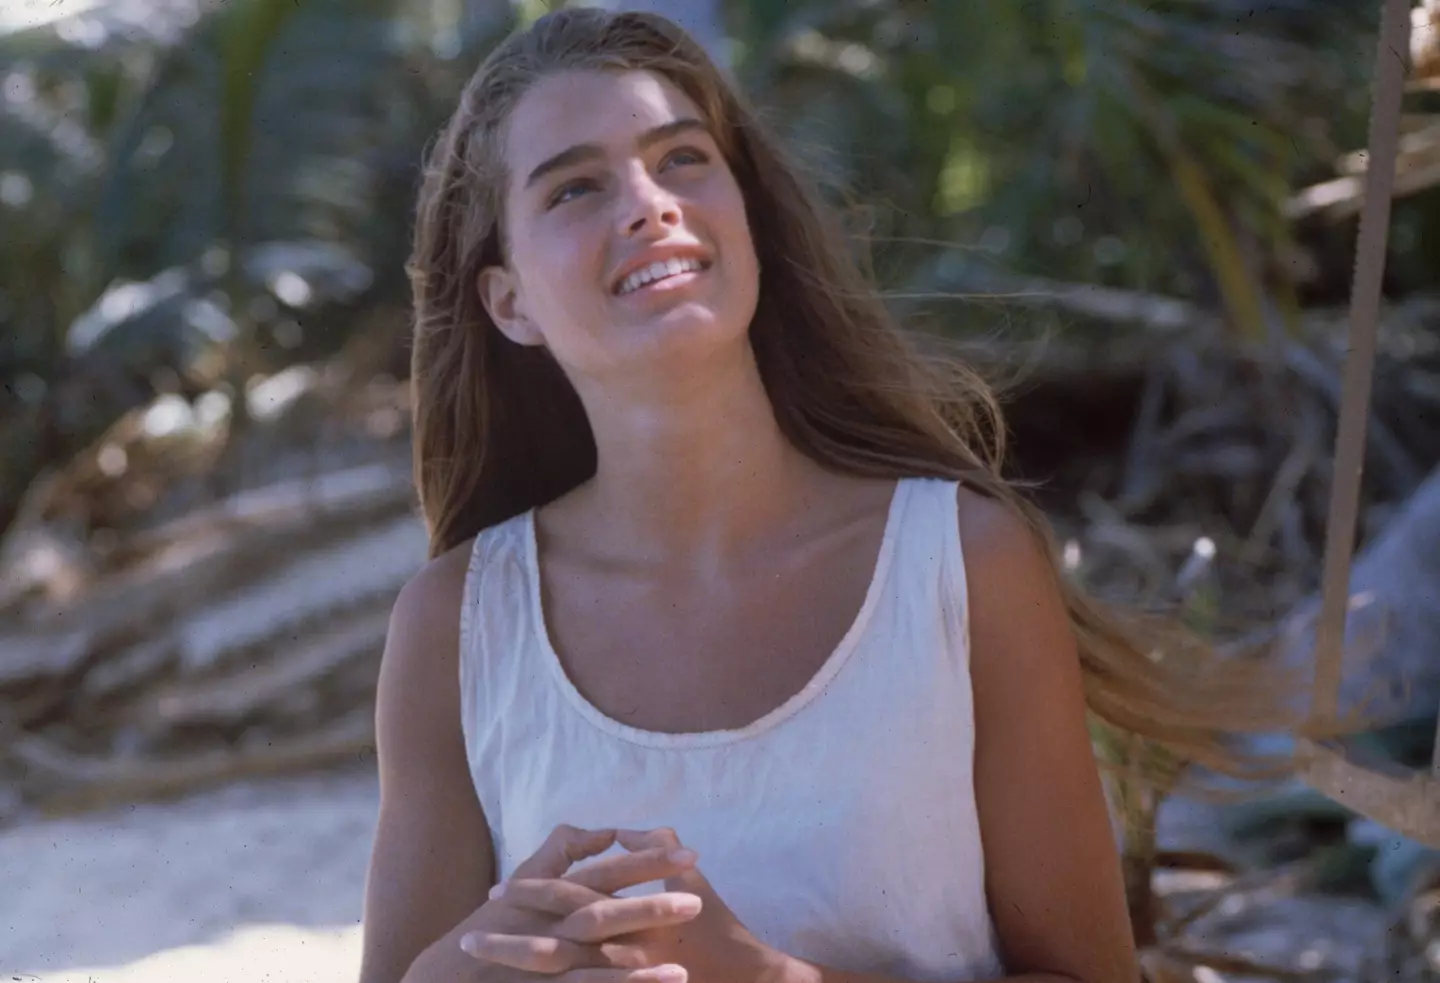 Shields was only 14 while filming The Blue Lagoon.